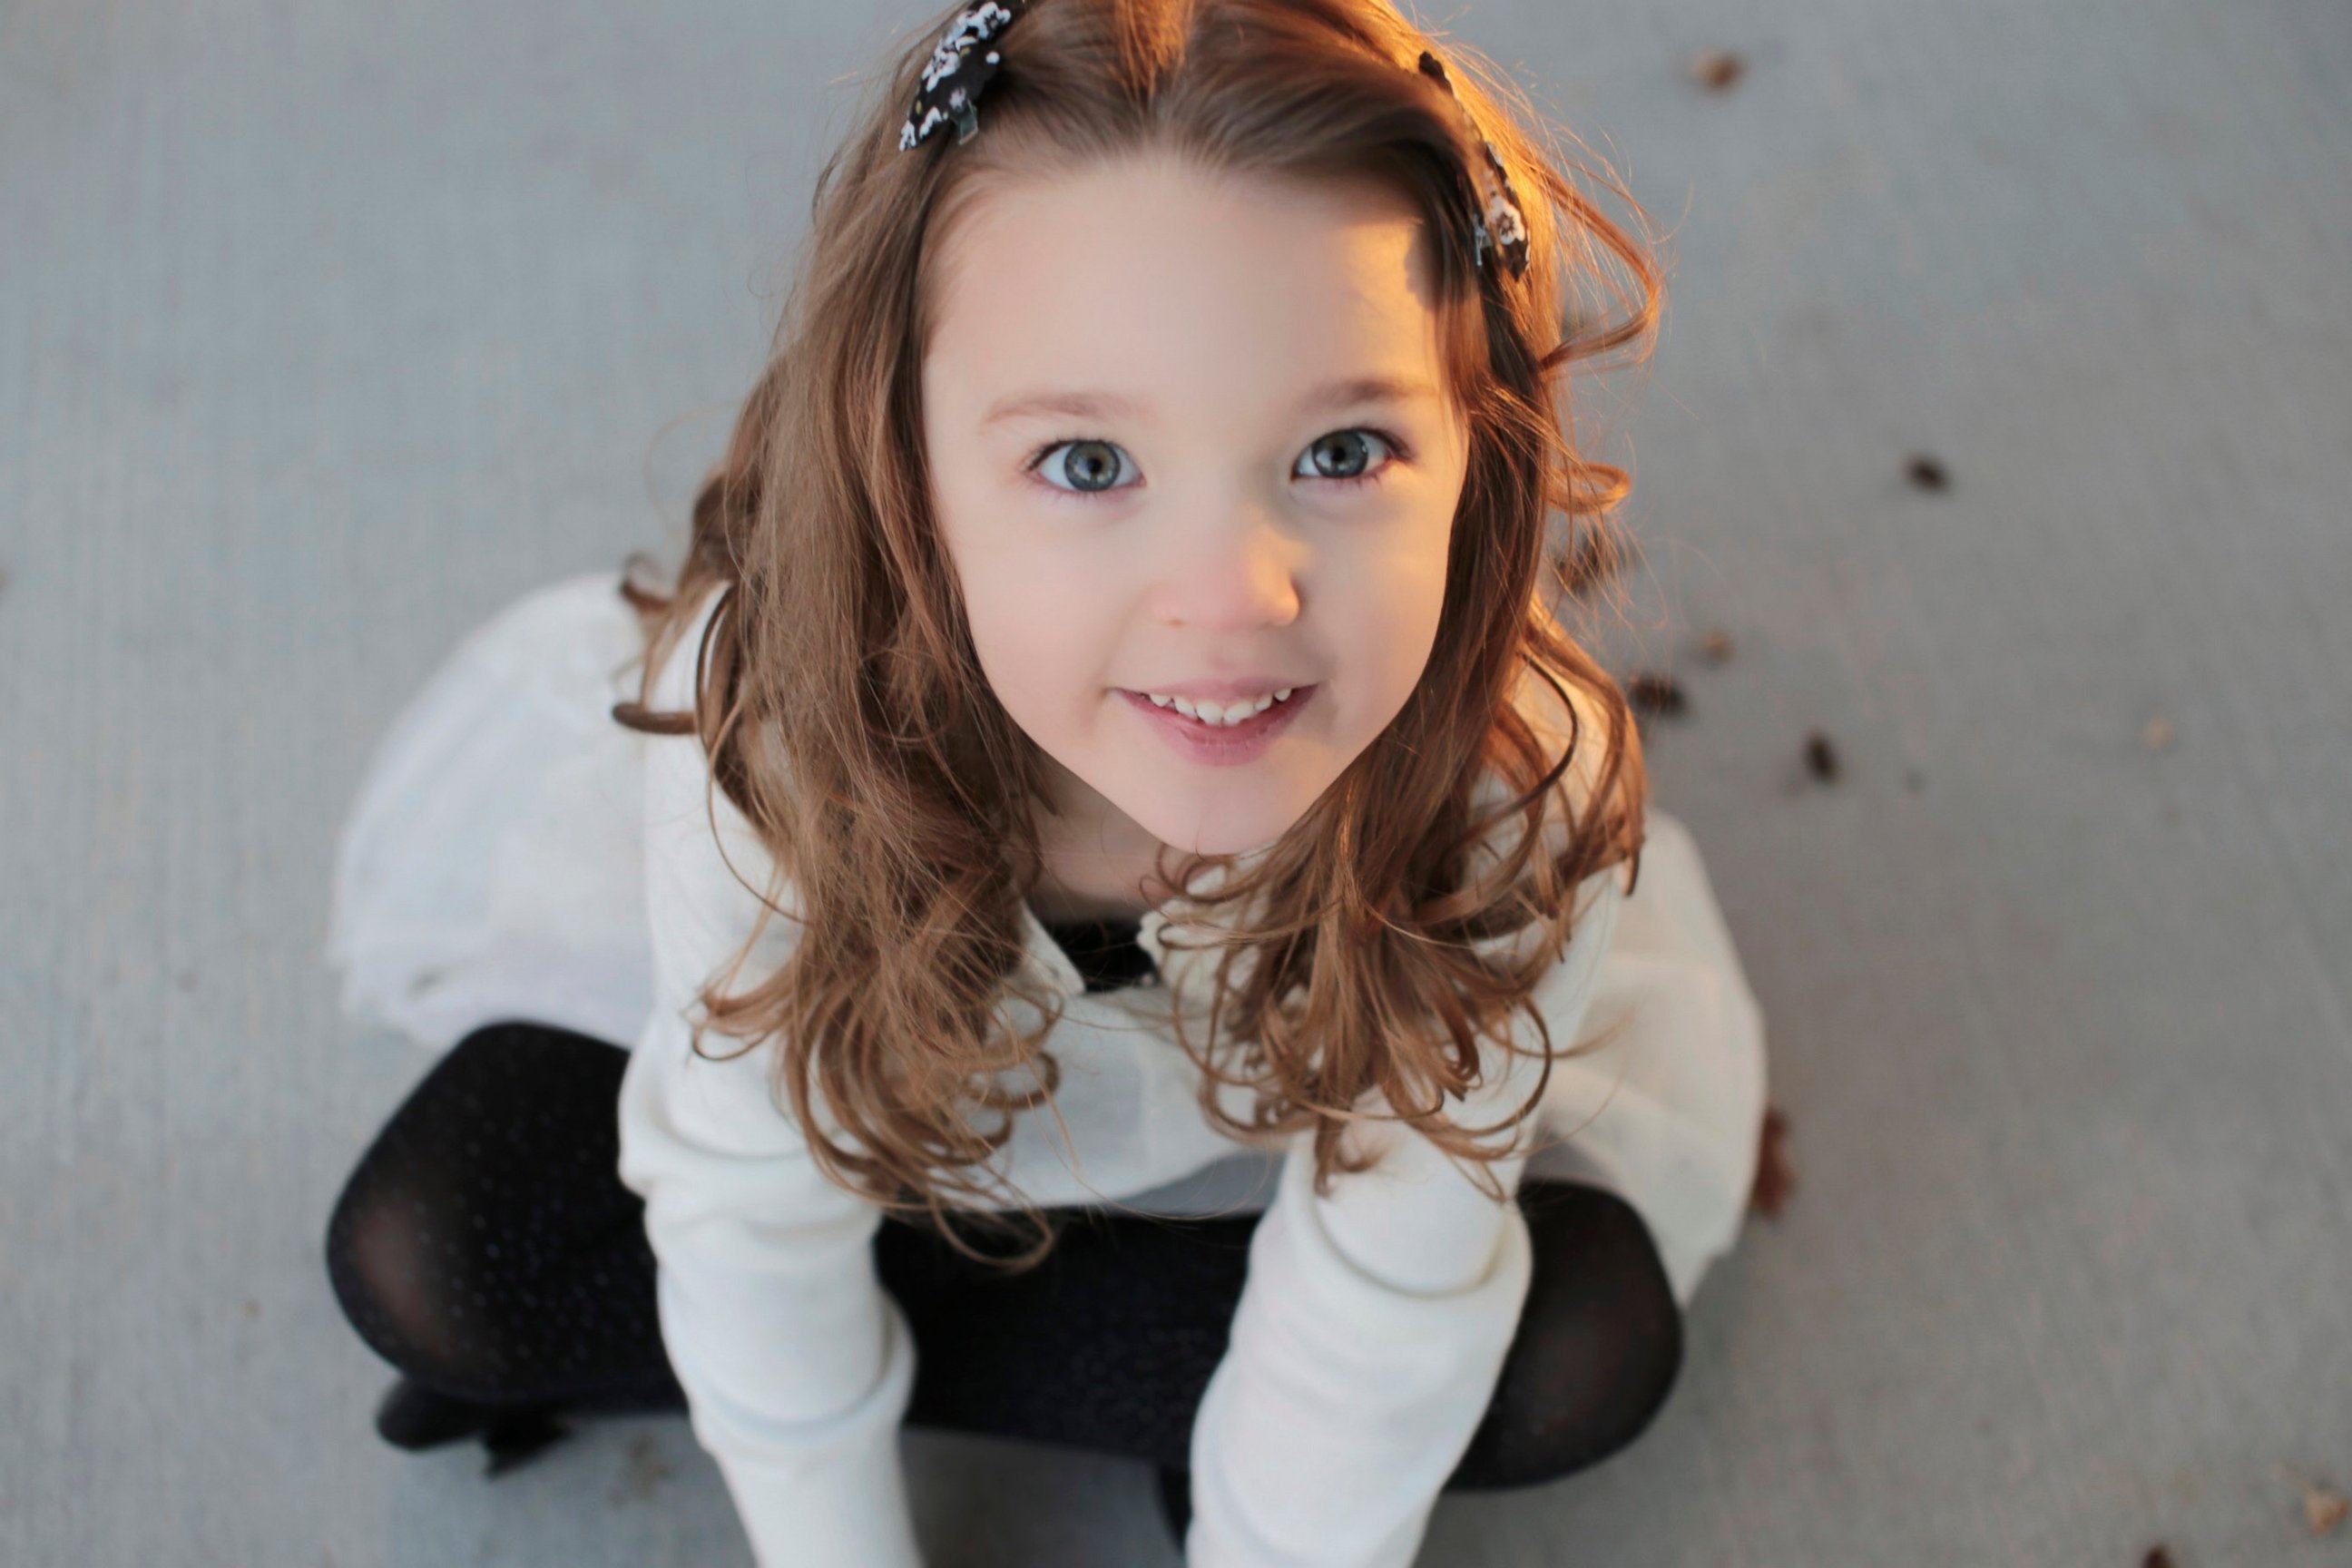 PHOTO: Five-year-old Kiera Driscoll from Nevada died on Jan. 20, 2015, just three days after her father says she began exhibiting flu symptoms.